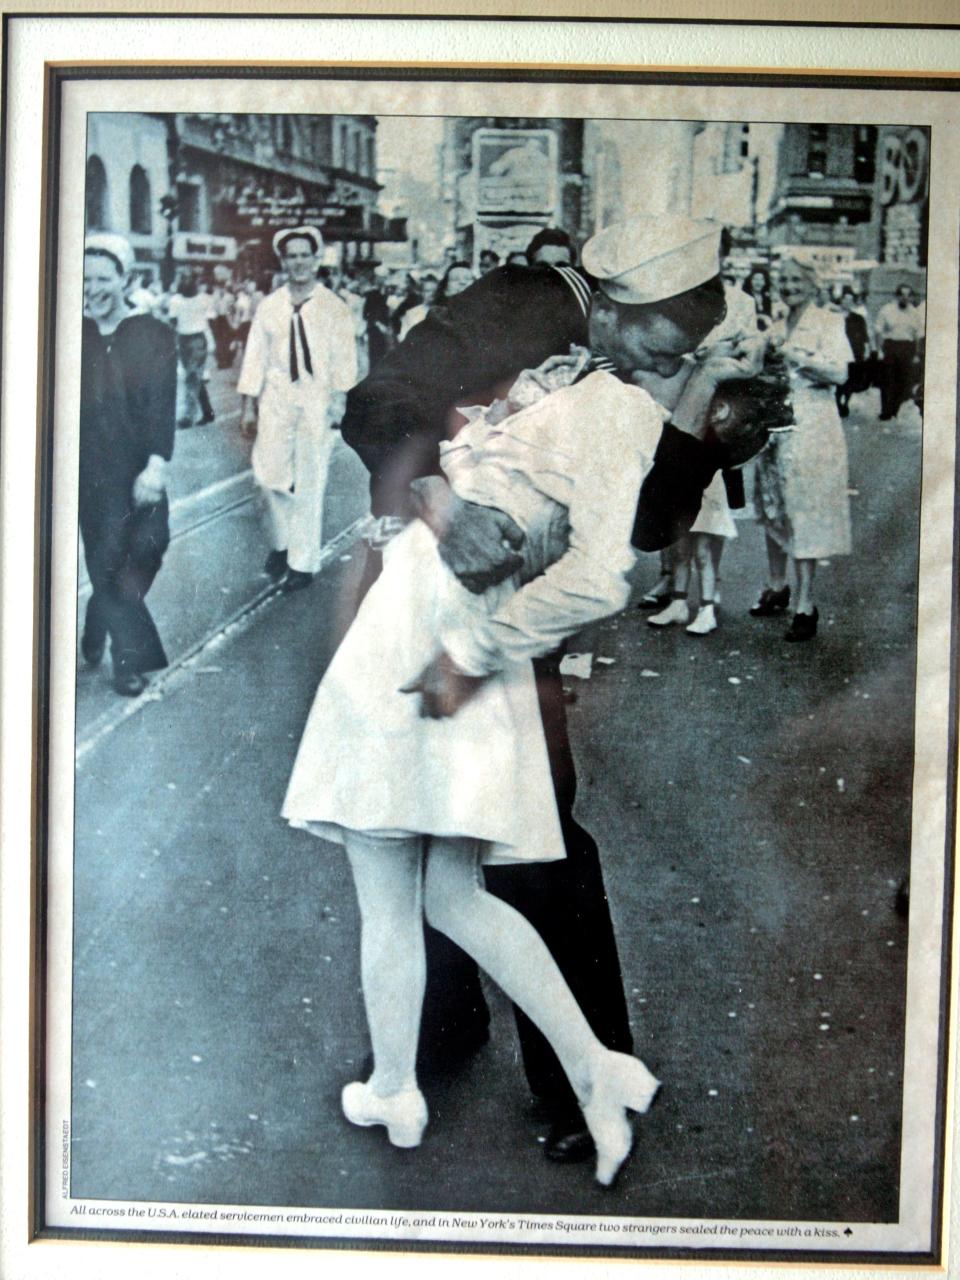 The famous Alfred Eisenstadt photo of Mendonsa kissing a nurse in Times Square on VJ Day, 1945.